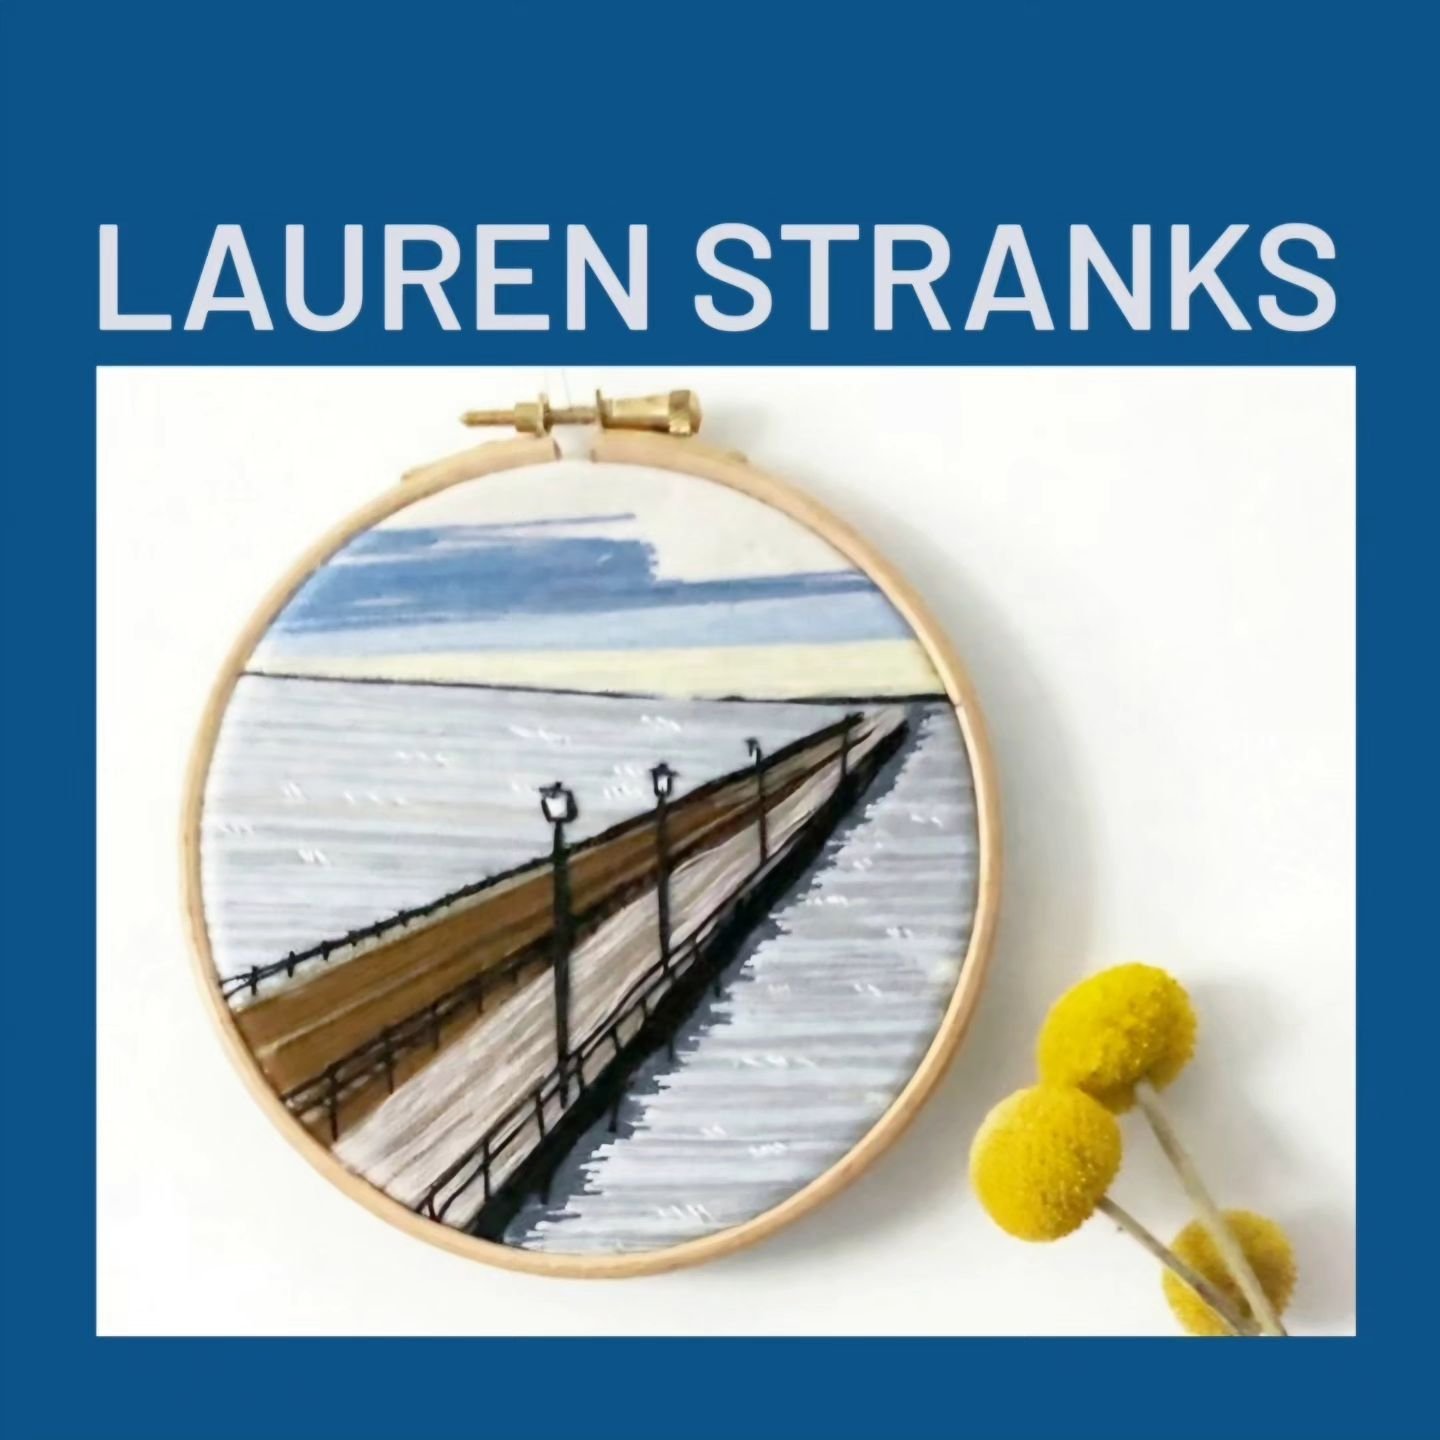 This artist elevates stitching to a new level with her superb architectural eye! Meet Lauren Stranks @littleleighstitchery. A very happy Lauren will be found in her second home @thedressmakerfabrics venue No. 26.
.
Preview party Saturday 6th July 5pm